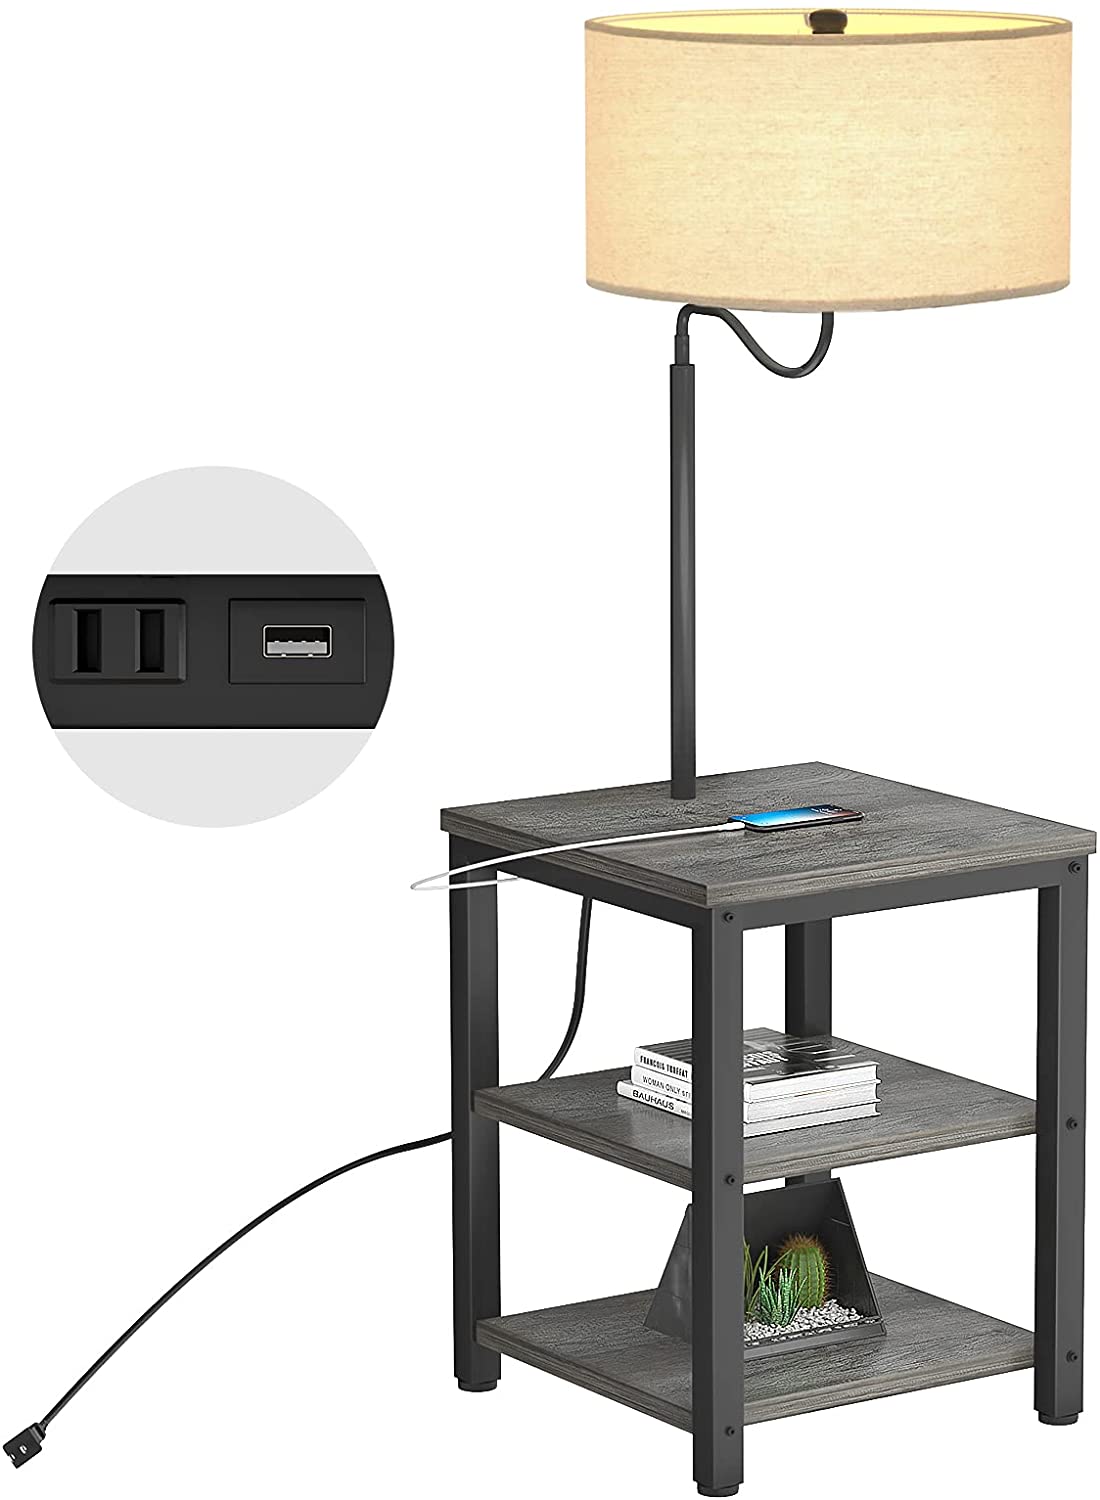 Antlux Floor Lamp With Side Table Usb, White End Table With Built In Lamp And Usb Port Black